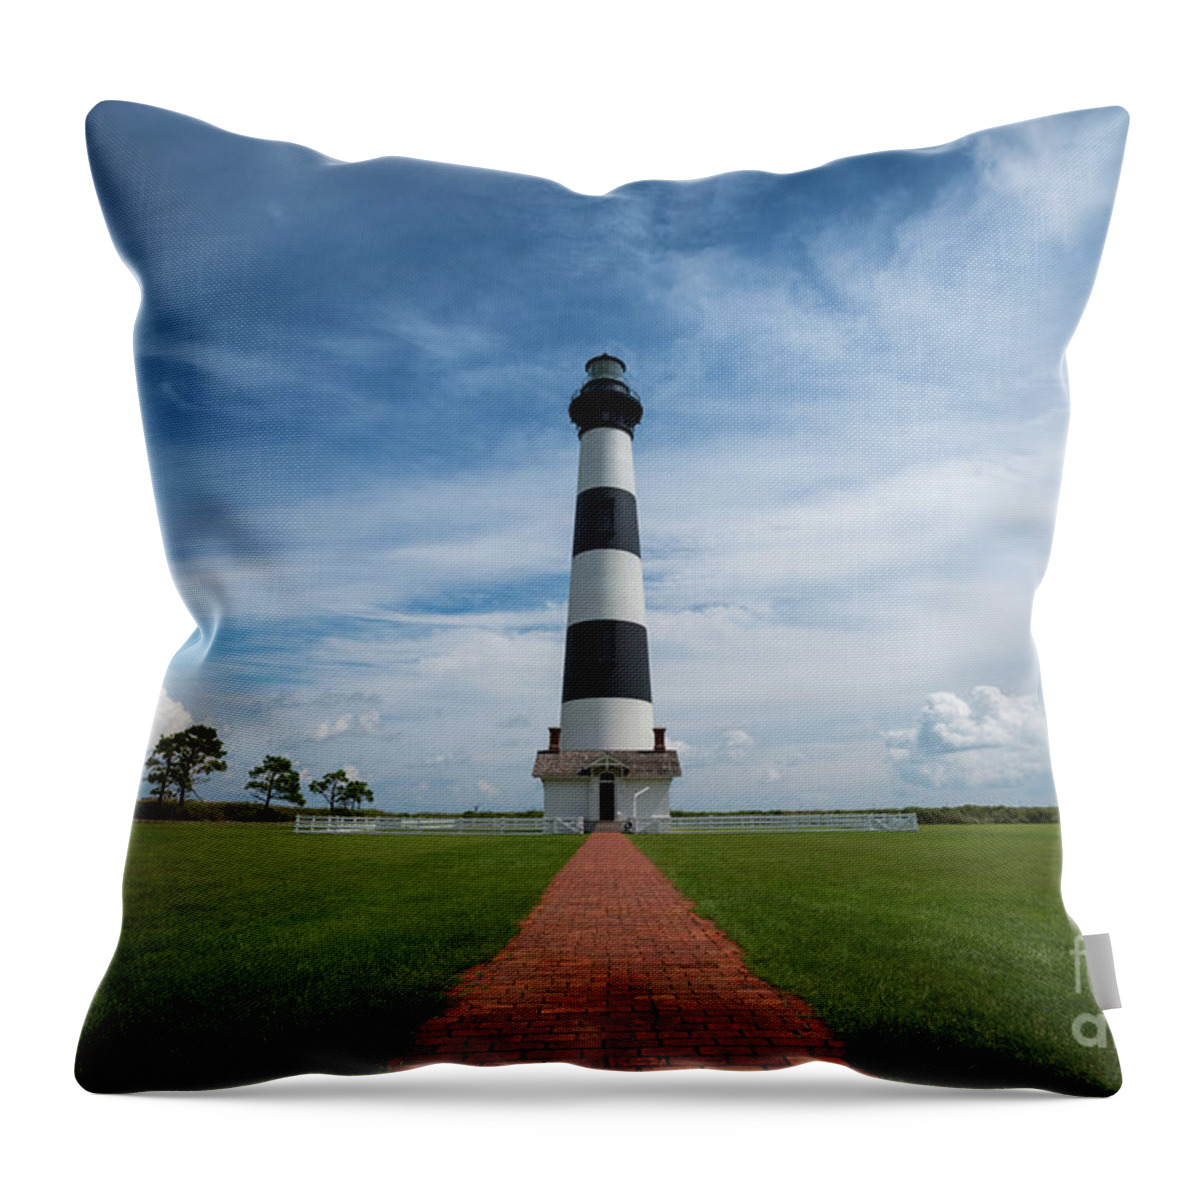 Bodie Island Lighthouse Throw Pillow featuring the photograph Bodie Island Light Day Shot by Michael Ver Sprill